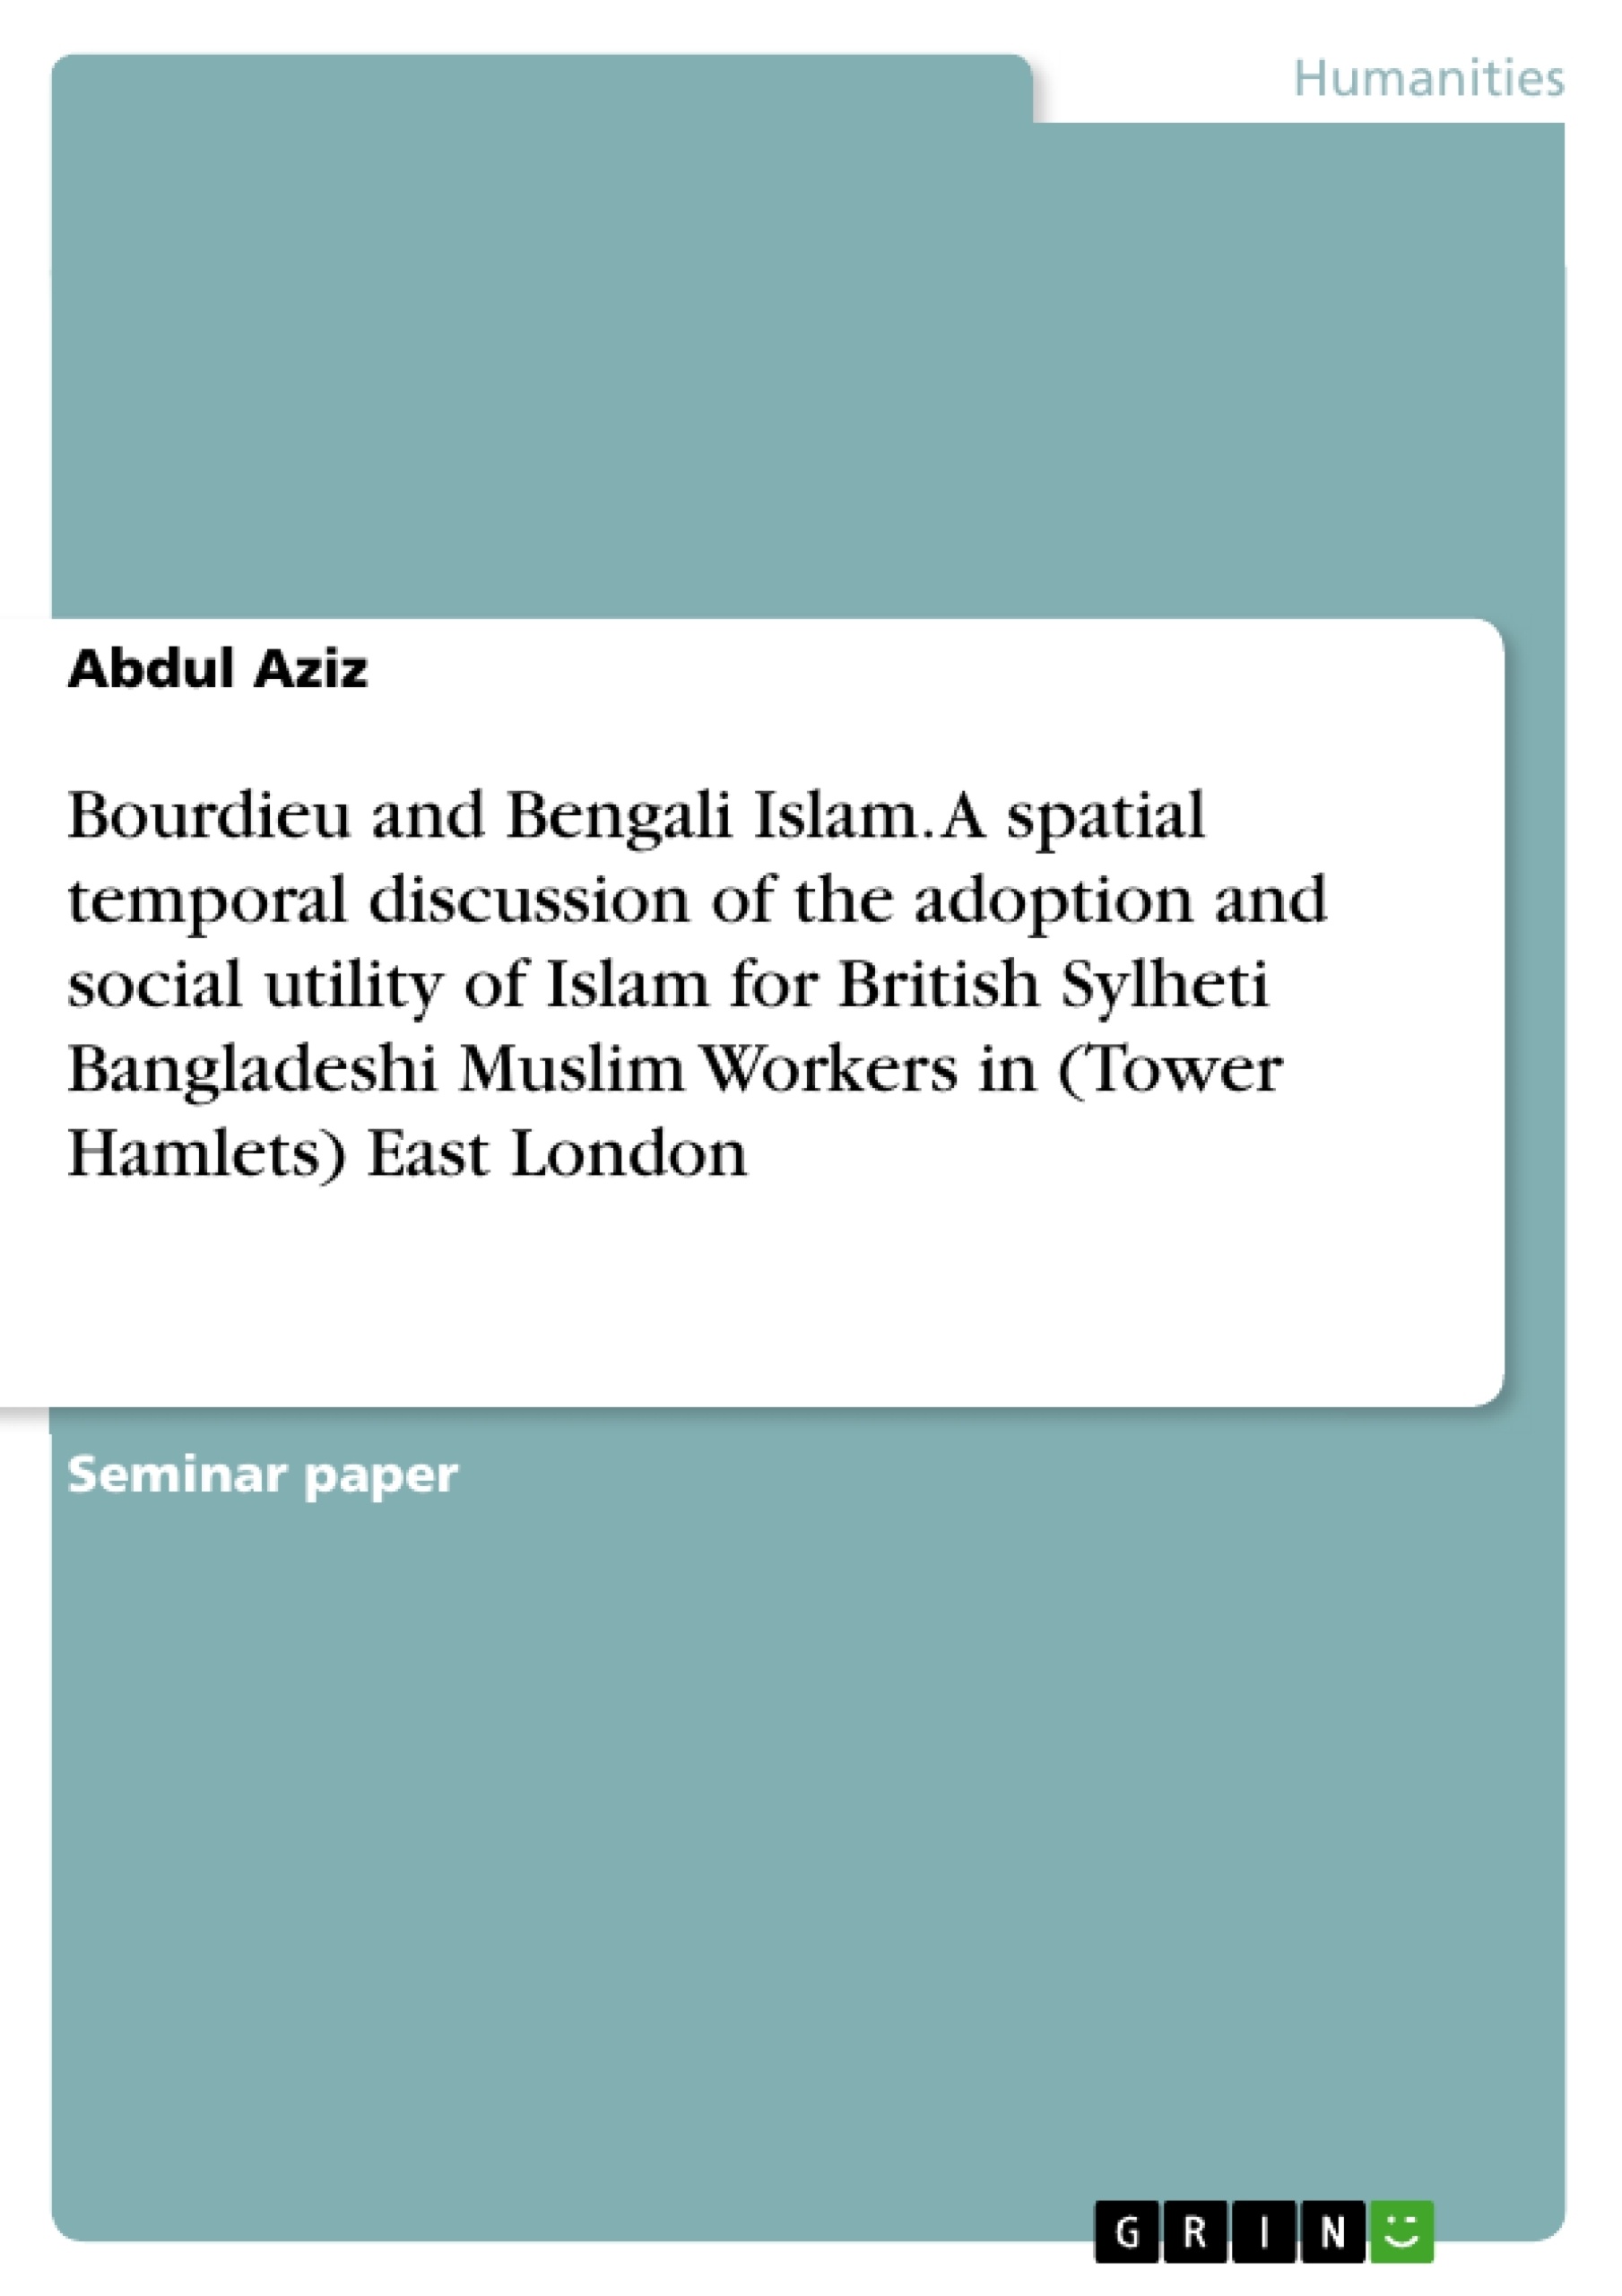 Title: Bourdieu and Bengali Islam. A spatial temporal discussion of the adoption and social utility of Islam for British Sylheti Bangladeshi Muslim Workers in (Tower Hamlets) East London